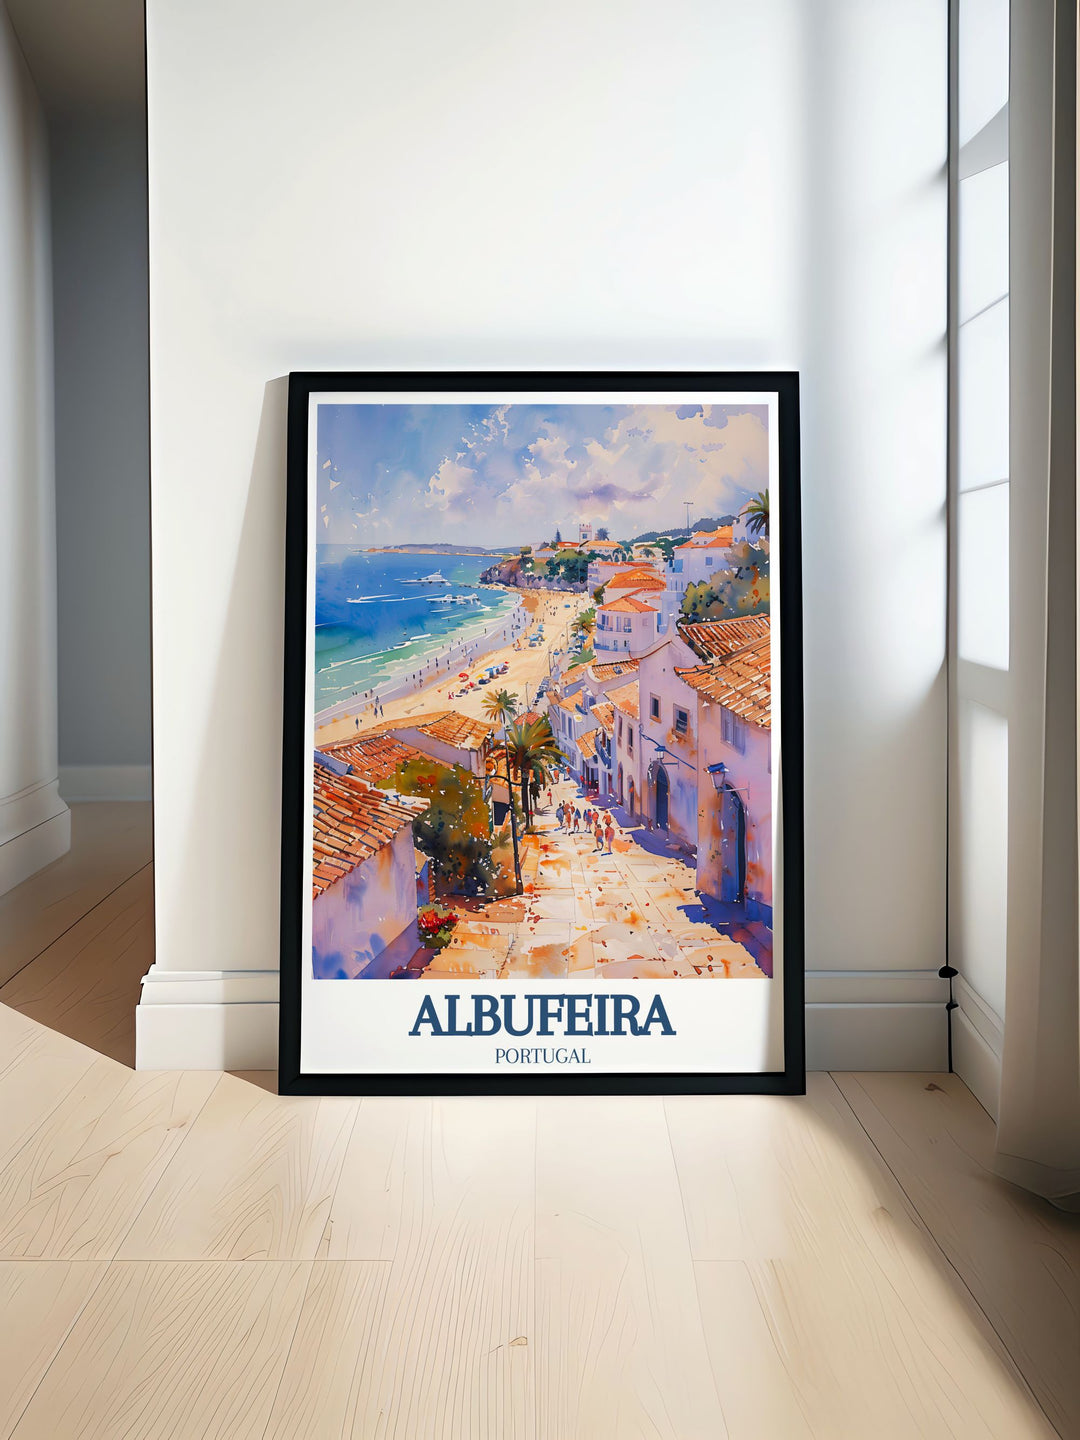 Stunning wall art featuring Praia da Oura in Albufeira, Portugal, showcasing the serene beauty and golden sands of this popular beach.